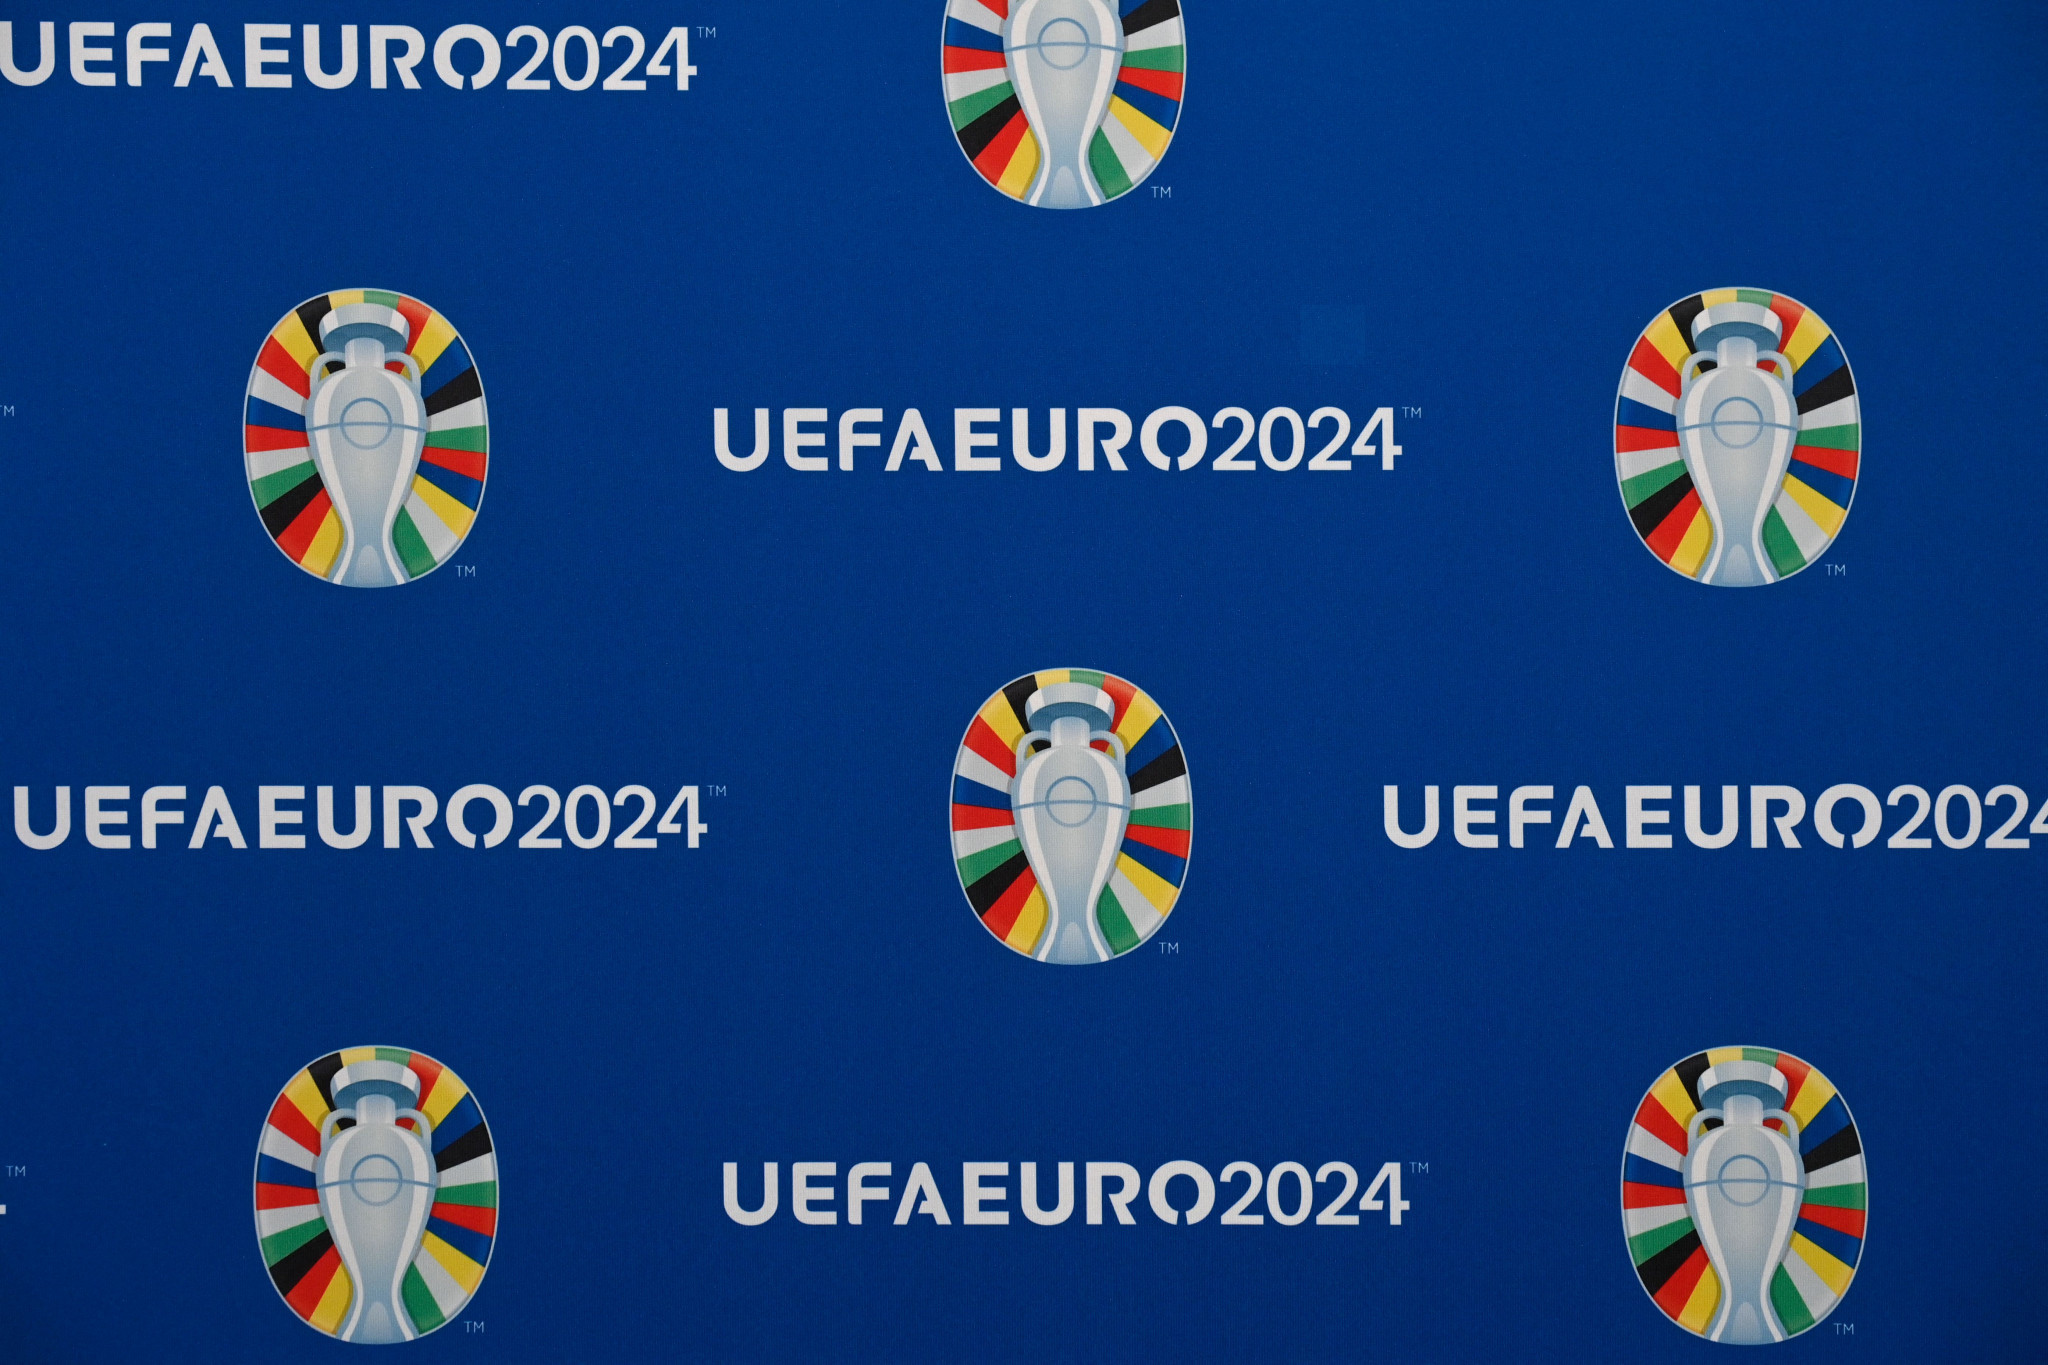 UEFA Euro 2024 is scheduled to take place in Germany ©Getty Images